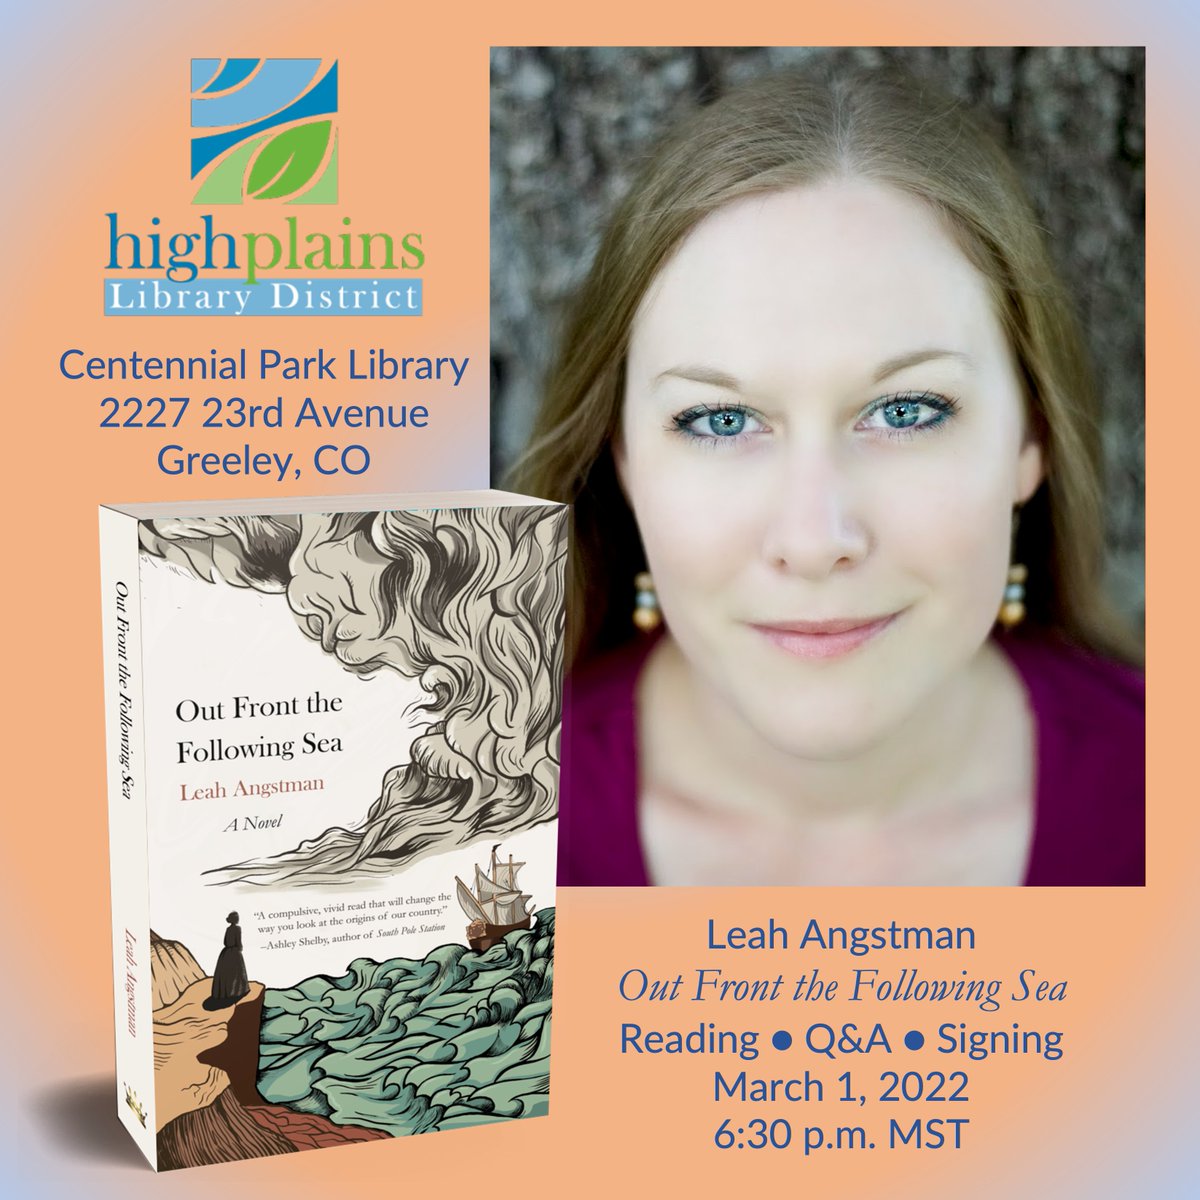 Next week! I'll be reading/signing at Centennial Park Library @MyHPLD in #Greeley, #Colorado, on March 1, 6:30 p.m. Come see me!

#GreeleyCO #GreeleyColorado #LovelandCO #LovelandColorado #HighPlains